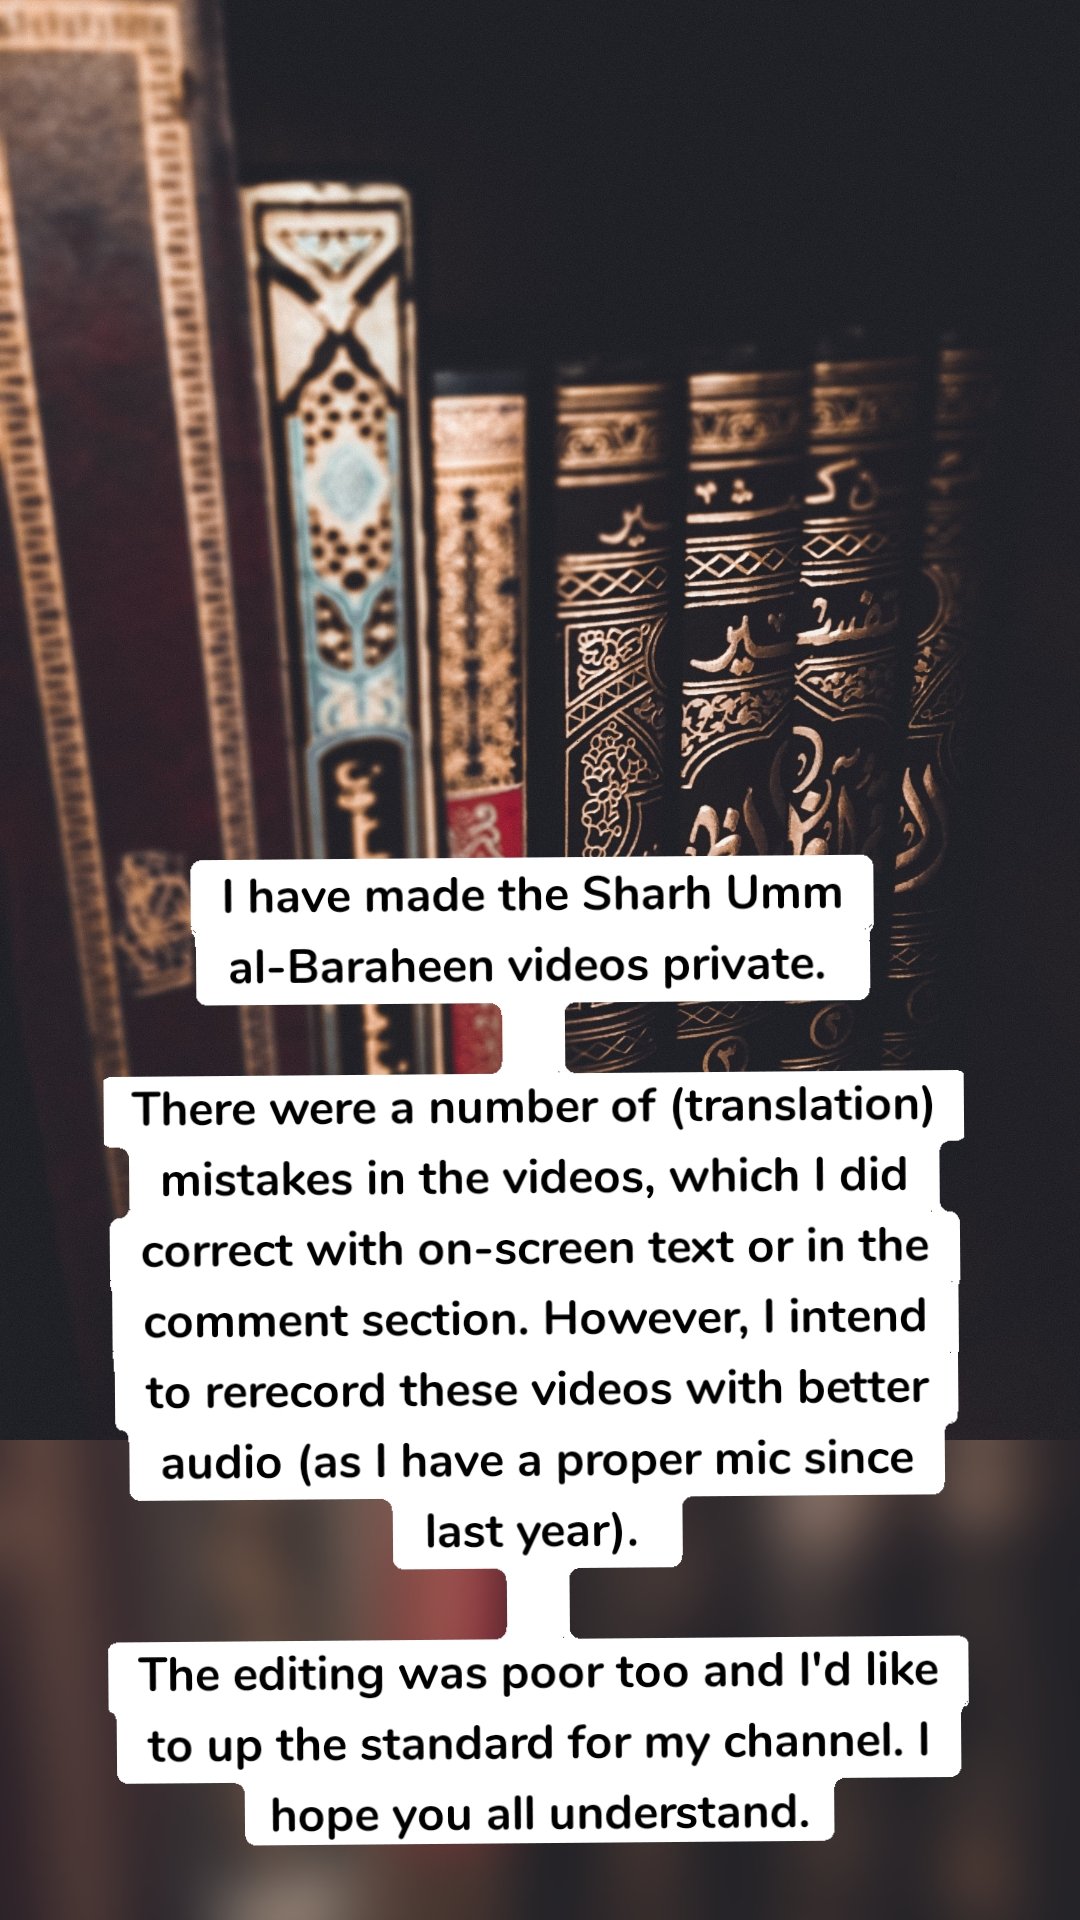 I have made the Sharh Umm al-Baraheen videos private. 

There were a number of (translation) mistakes in the videos, which I did correct with on-screen text or in the comment section. However, I intend to rerecord these videos with better audio (as I have a proper mic since last year). 

The editing was poor too and I'd like to up the standard for my channel. I hope you all understand.